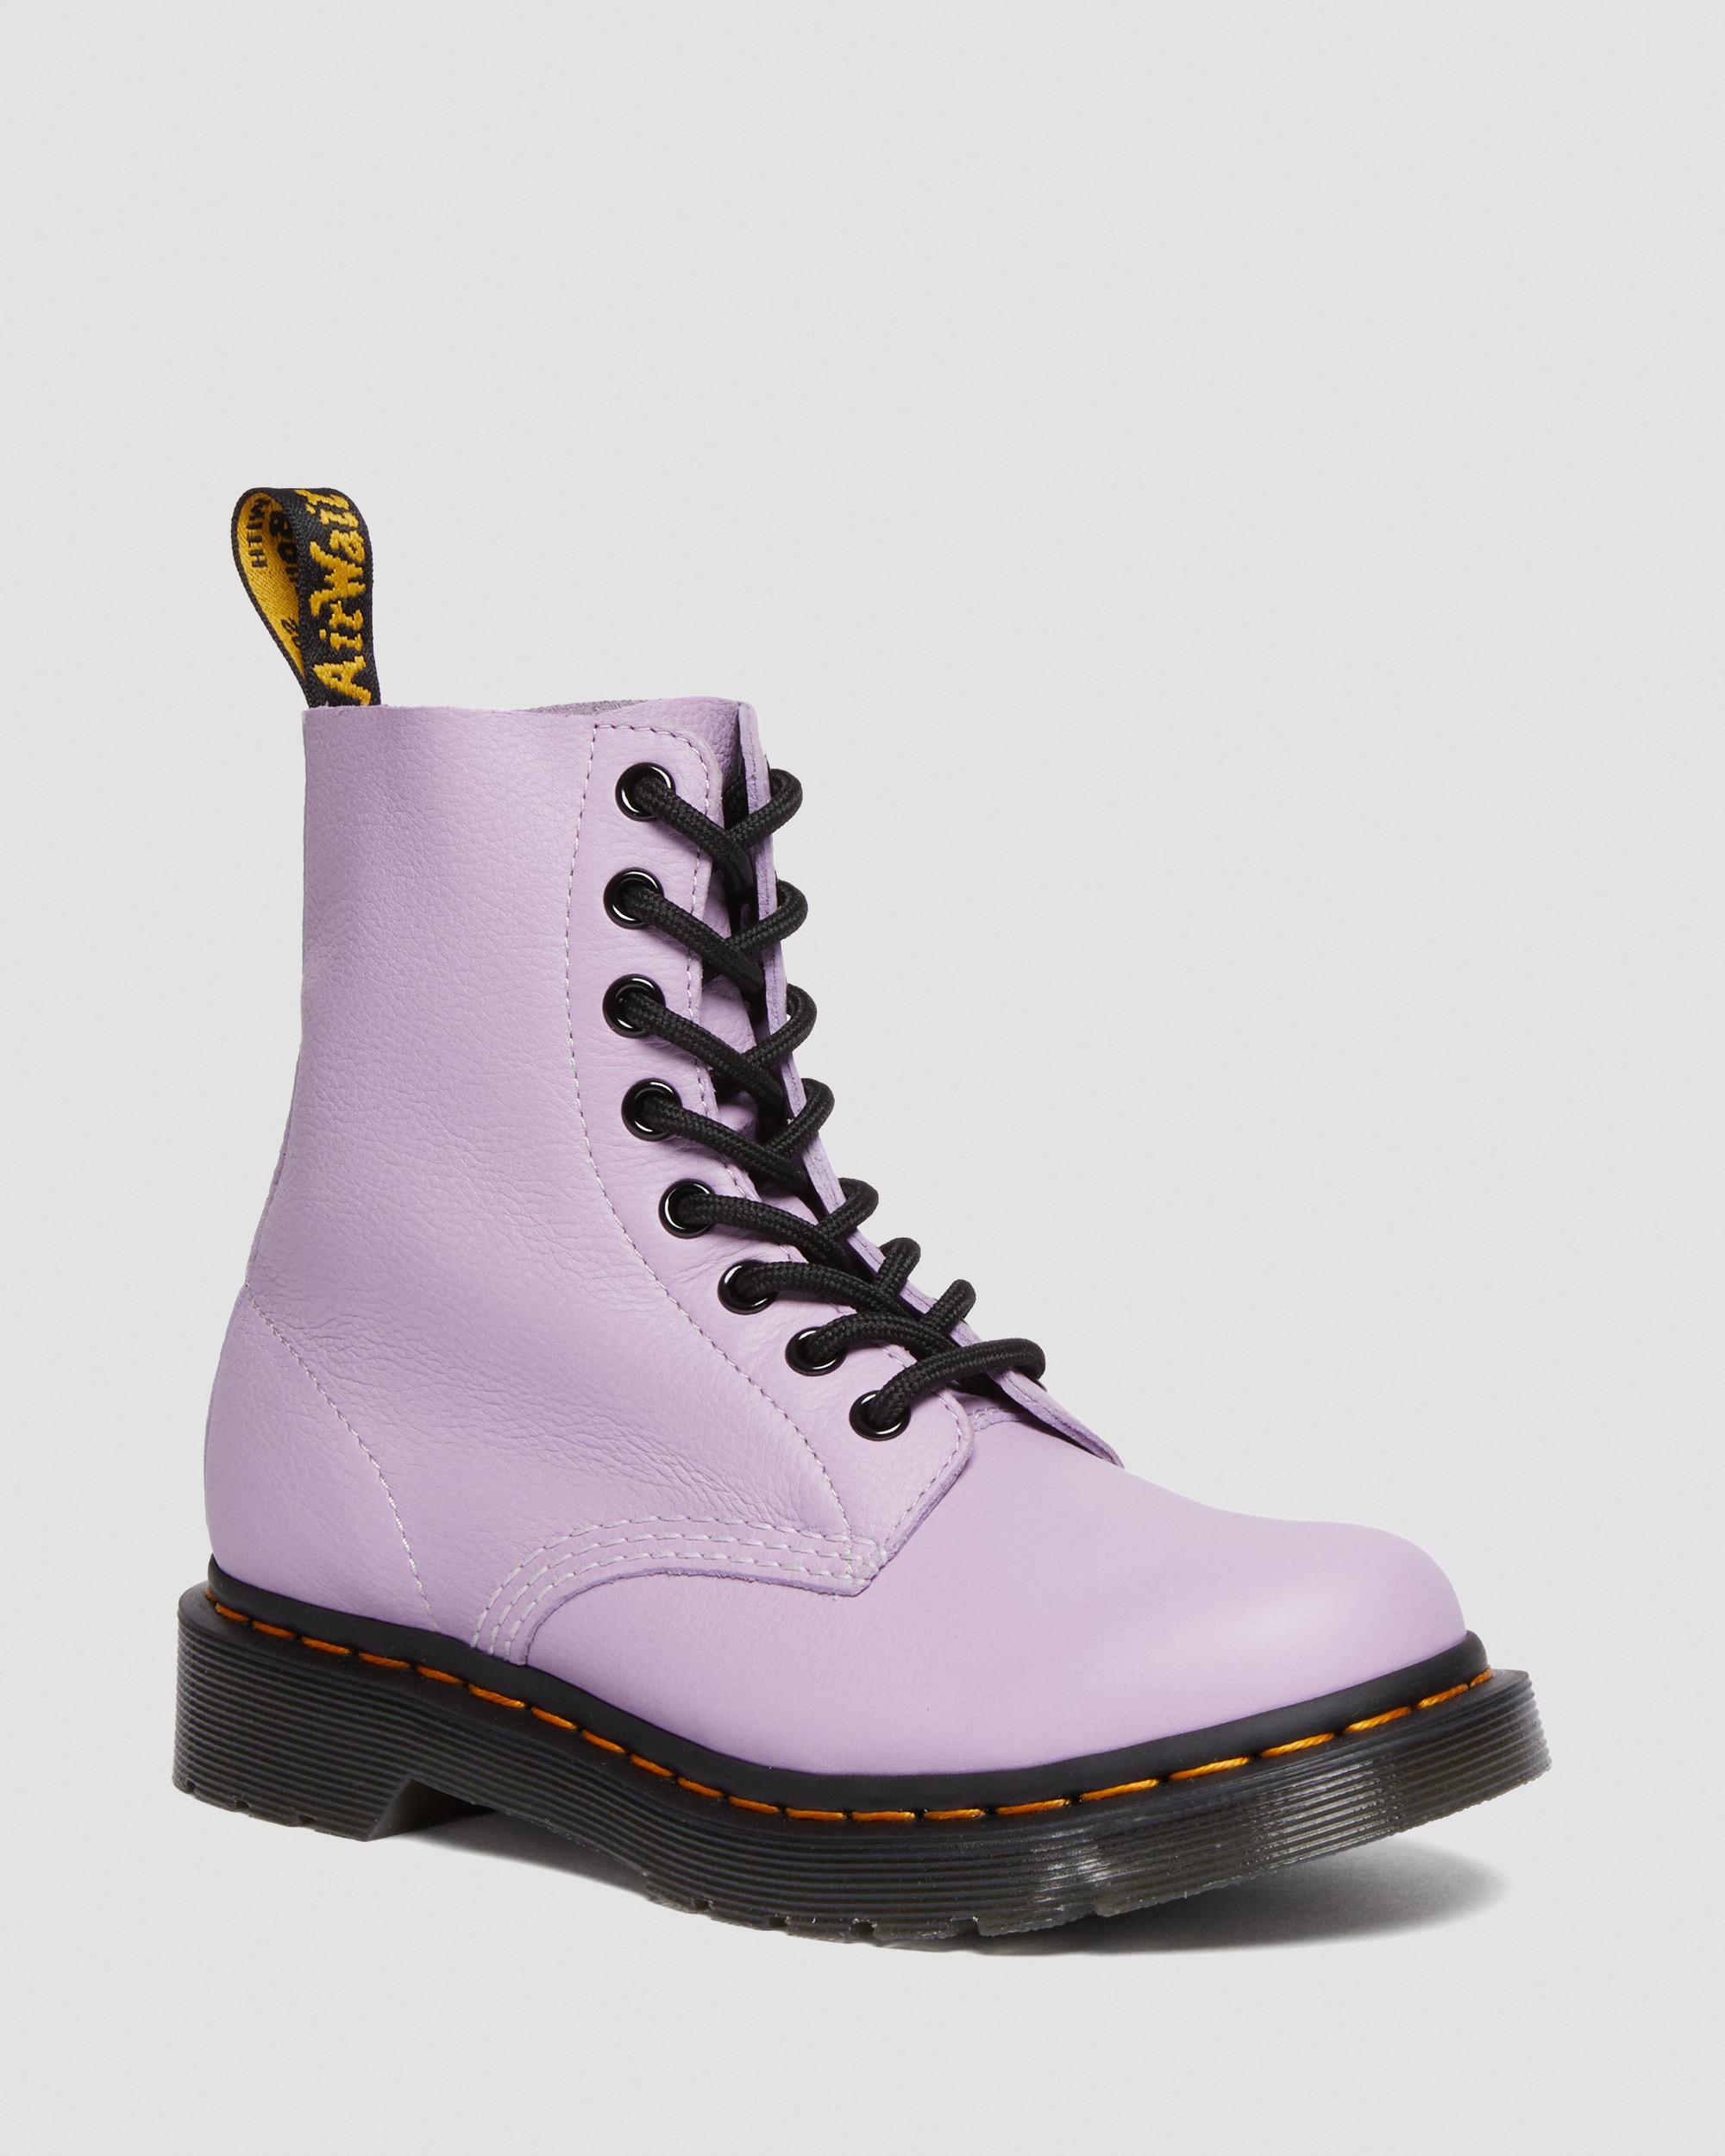 1460 Women\'s Pascal | Up Martens Eyelet Lilac Lace Dr. Black in Boots